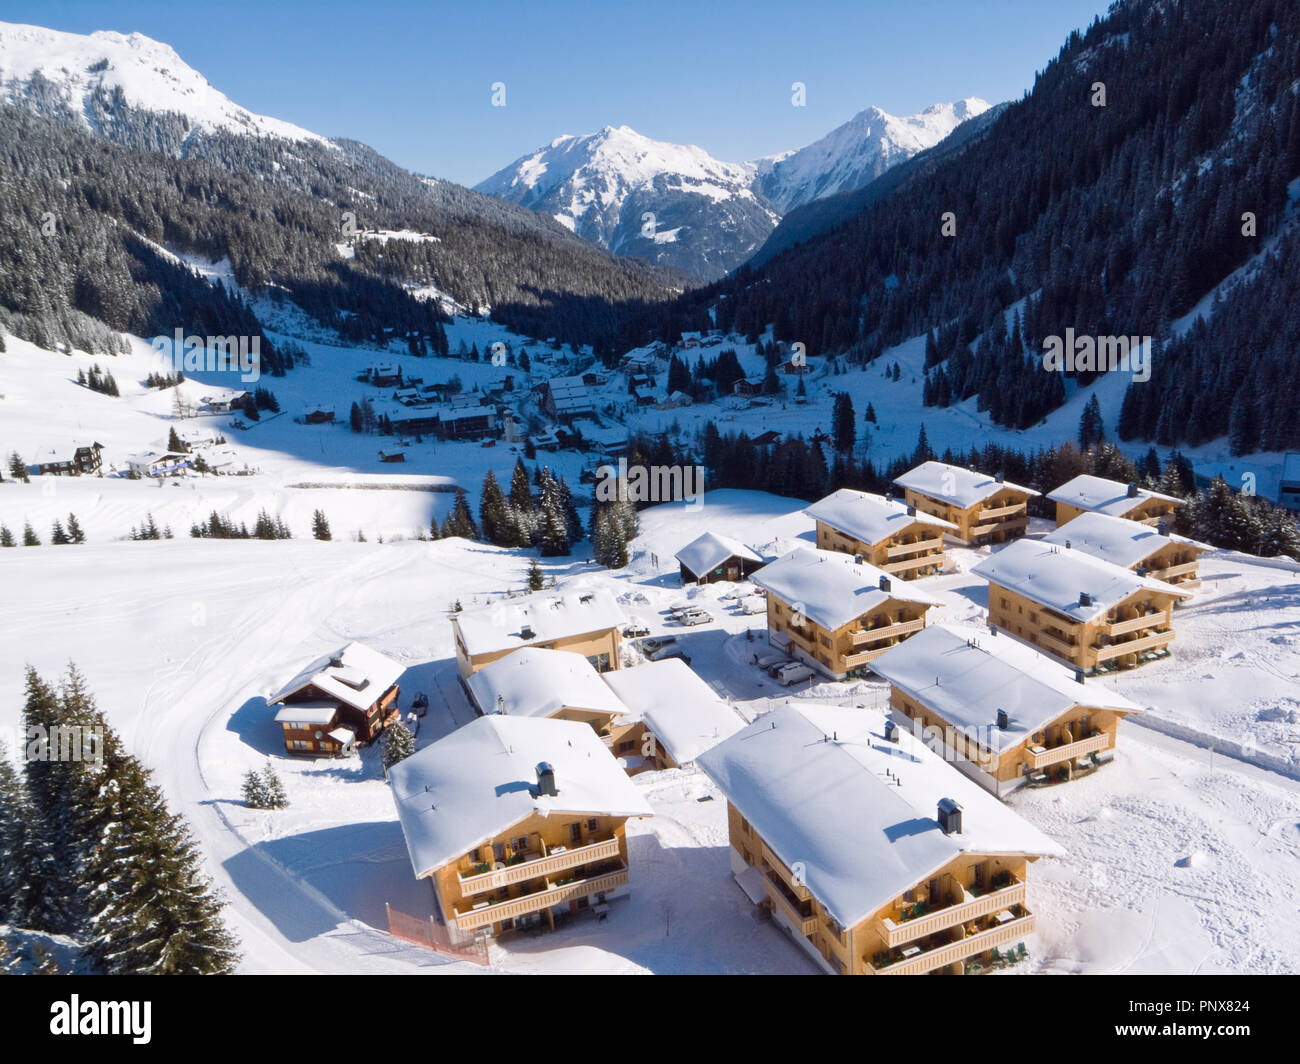 Gargellen, a village in the Austrian Alps, with snow covered chalets in the foreground and mountains in the background. Stock Photo